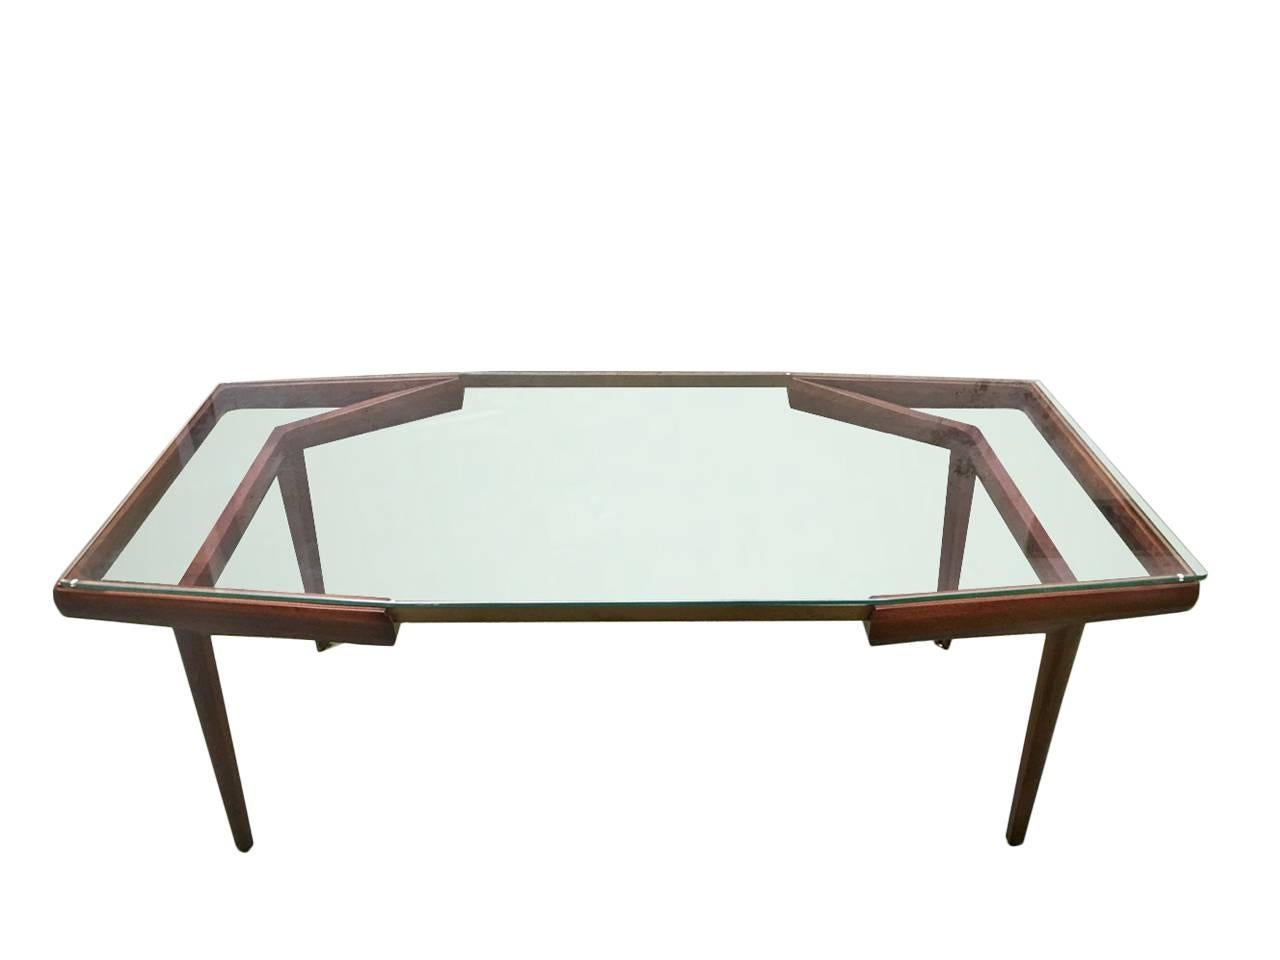 Beautiful dining table, design Pierluigi Spadolini in 1950.
Designed for a house in Florence, the geometric shape, the glass is original, of excellent construction, adjustable feet in brass, solid teakwood, brass band that spans the entire outside